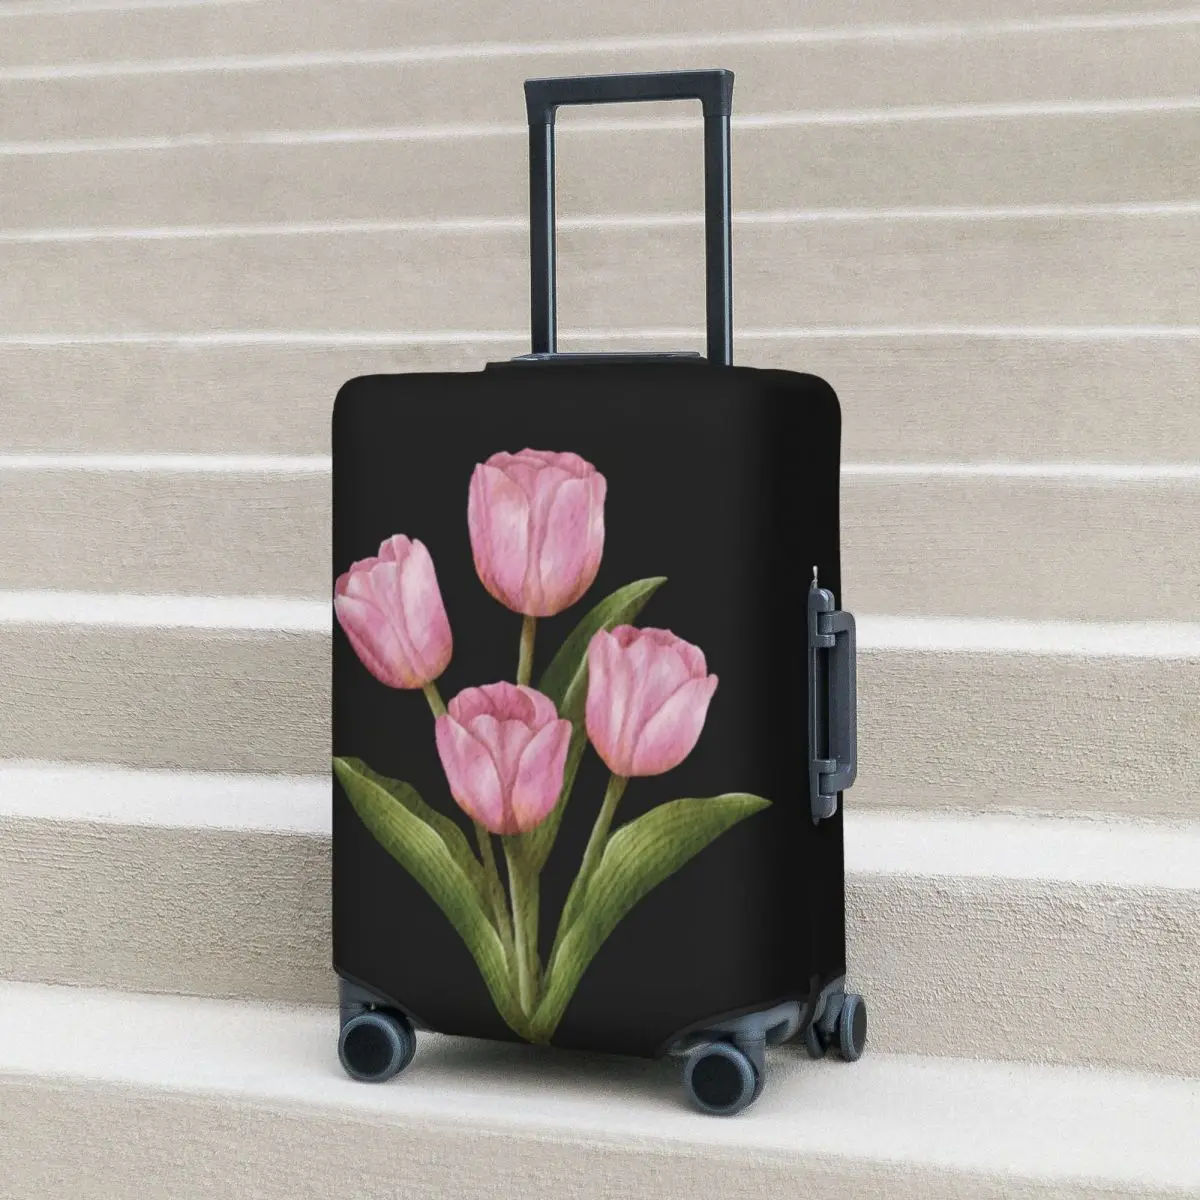 

Pink Tulip Suitcase Cover Floral Pattern Plants Business Holiday Elastic Luggage Case Protector